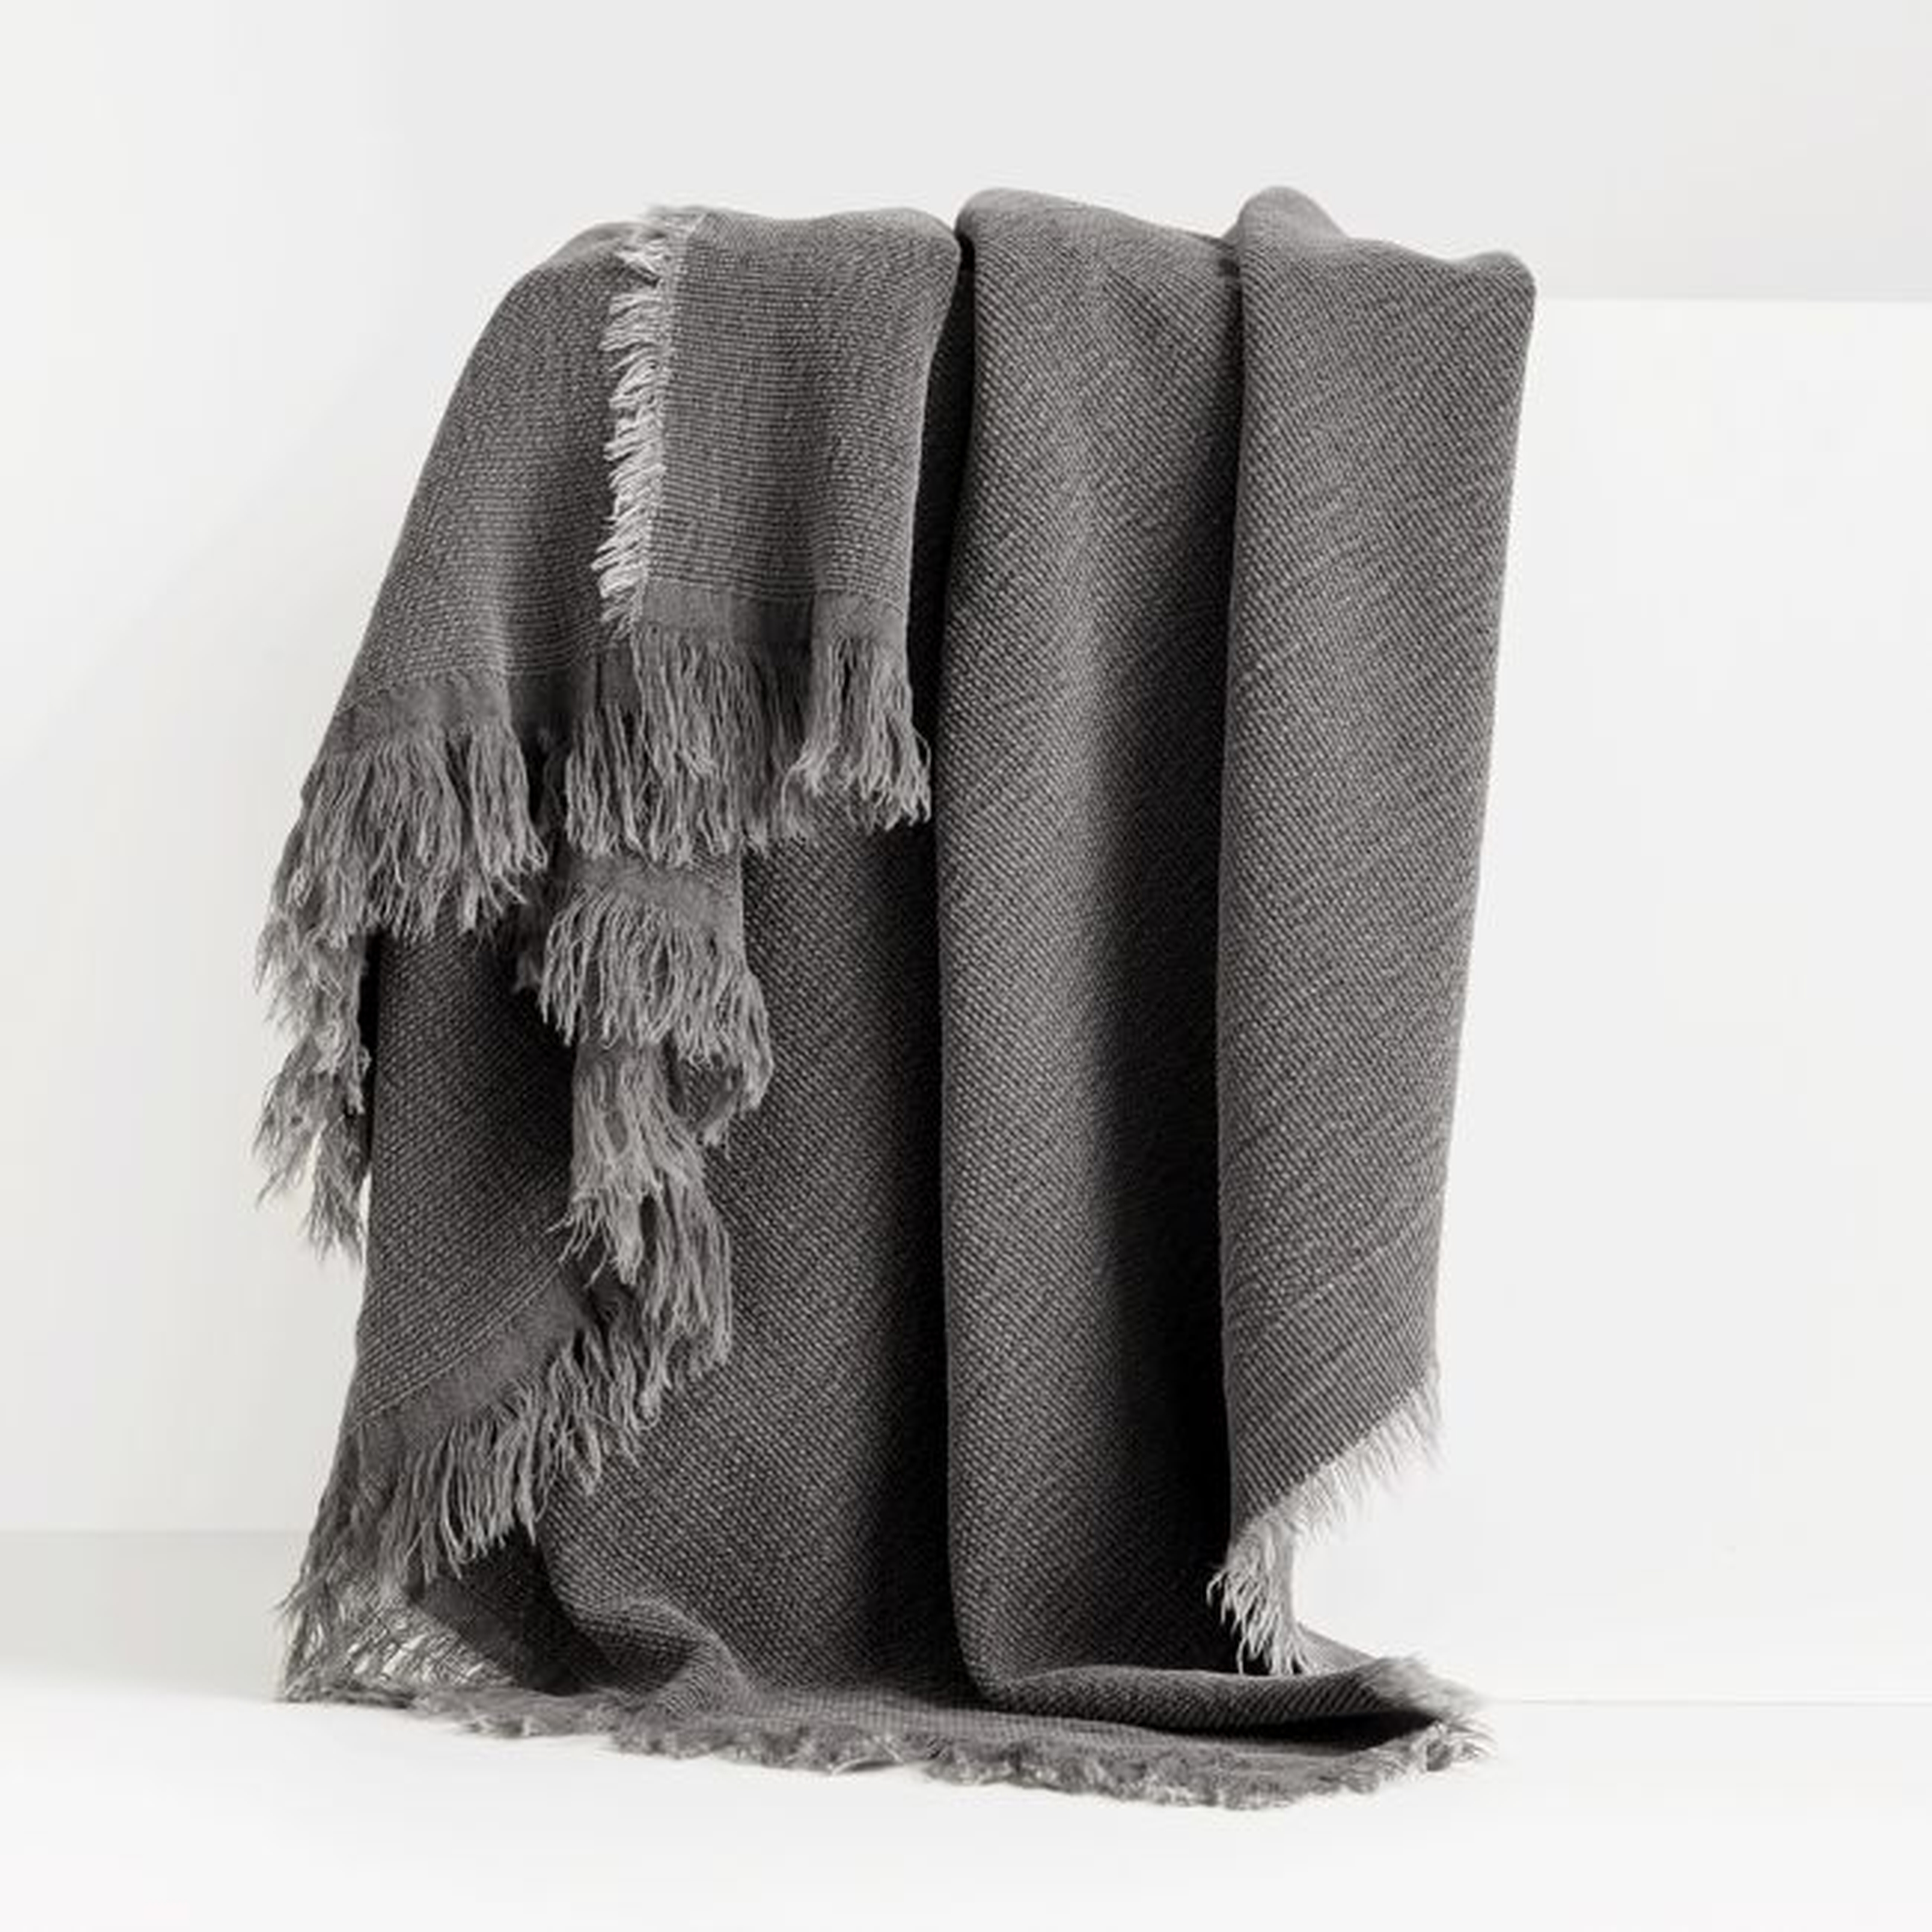 Olind Grey Fringed Throw Blanket - Crate and Barrel